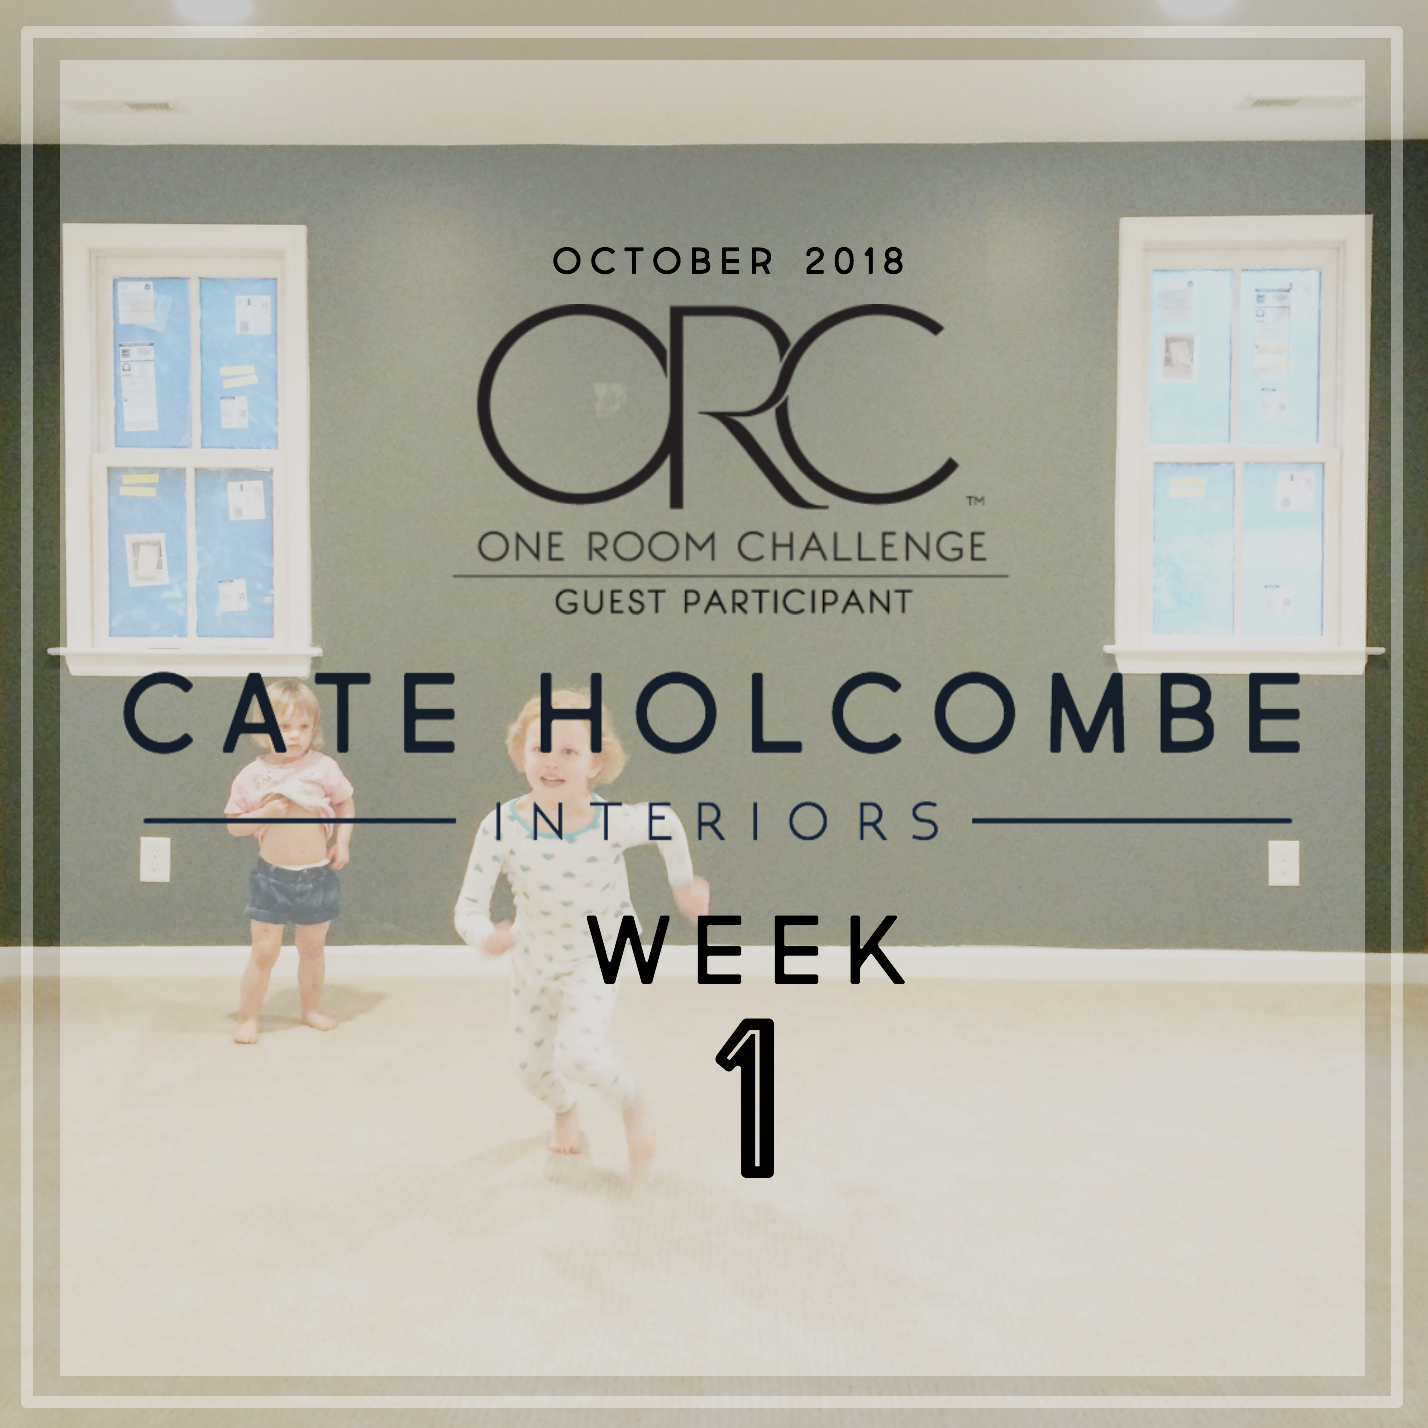 ORC Cate Holcombe Interiors Week 1